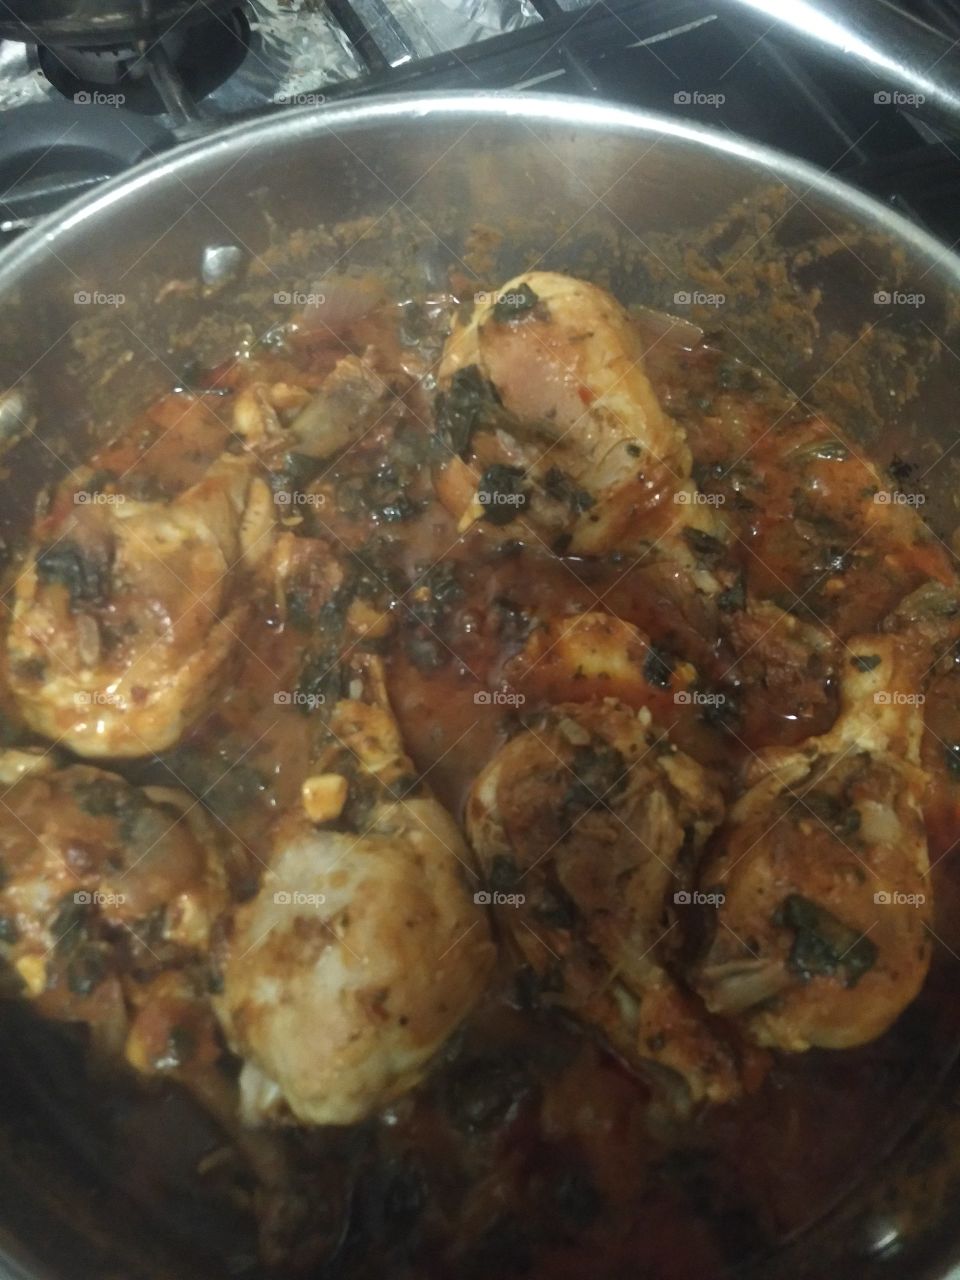 chicken and spinach